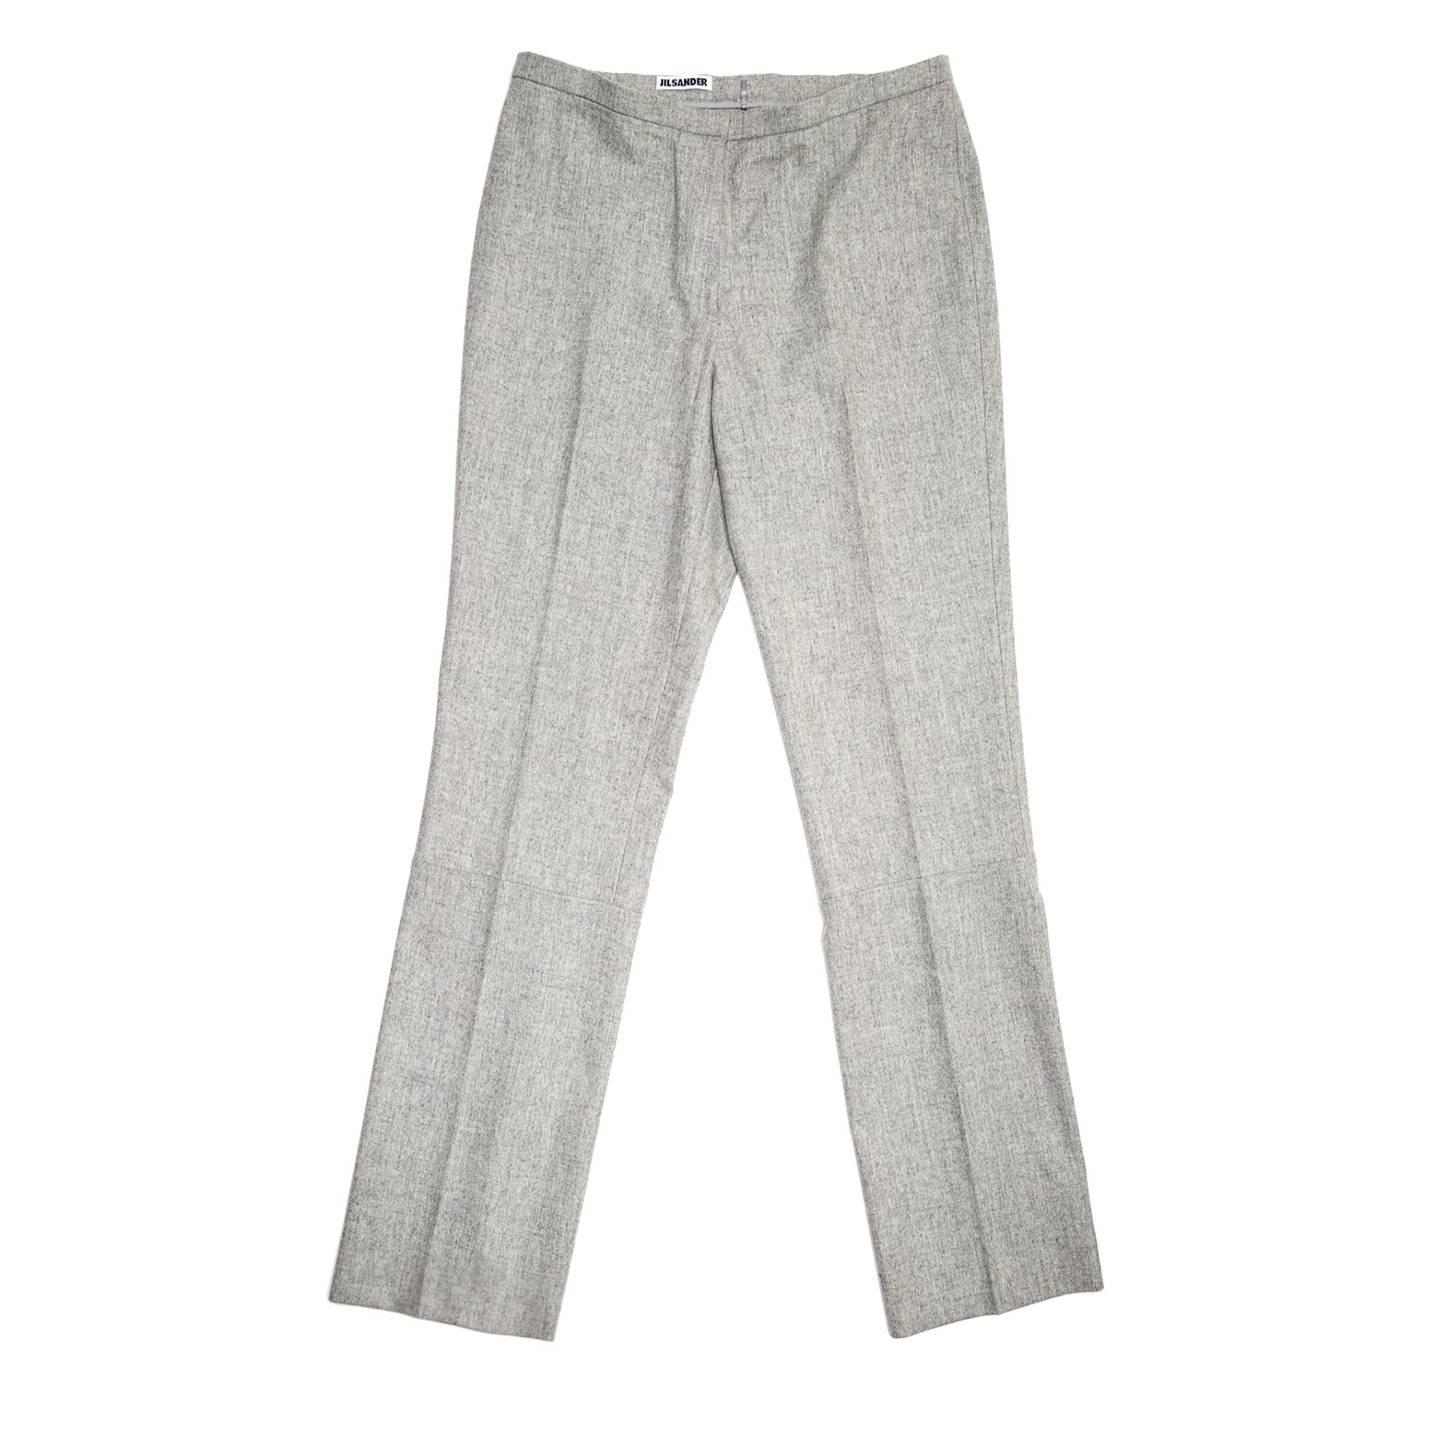 Light grey pure wool elegant pleated trousers with thin waistband, straight legs and seam detail at knee.

Size  42 French sizing

Condition  Excellent: worn a few times 